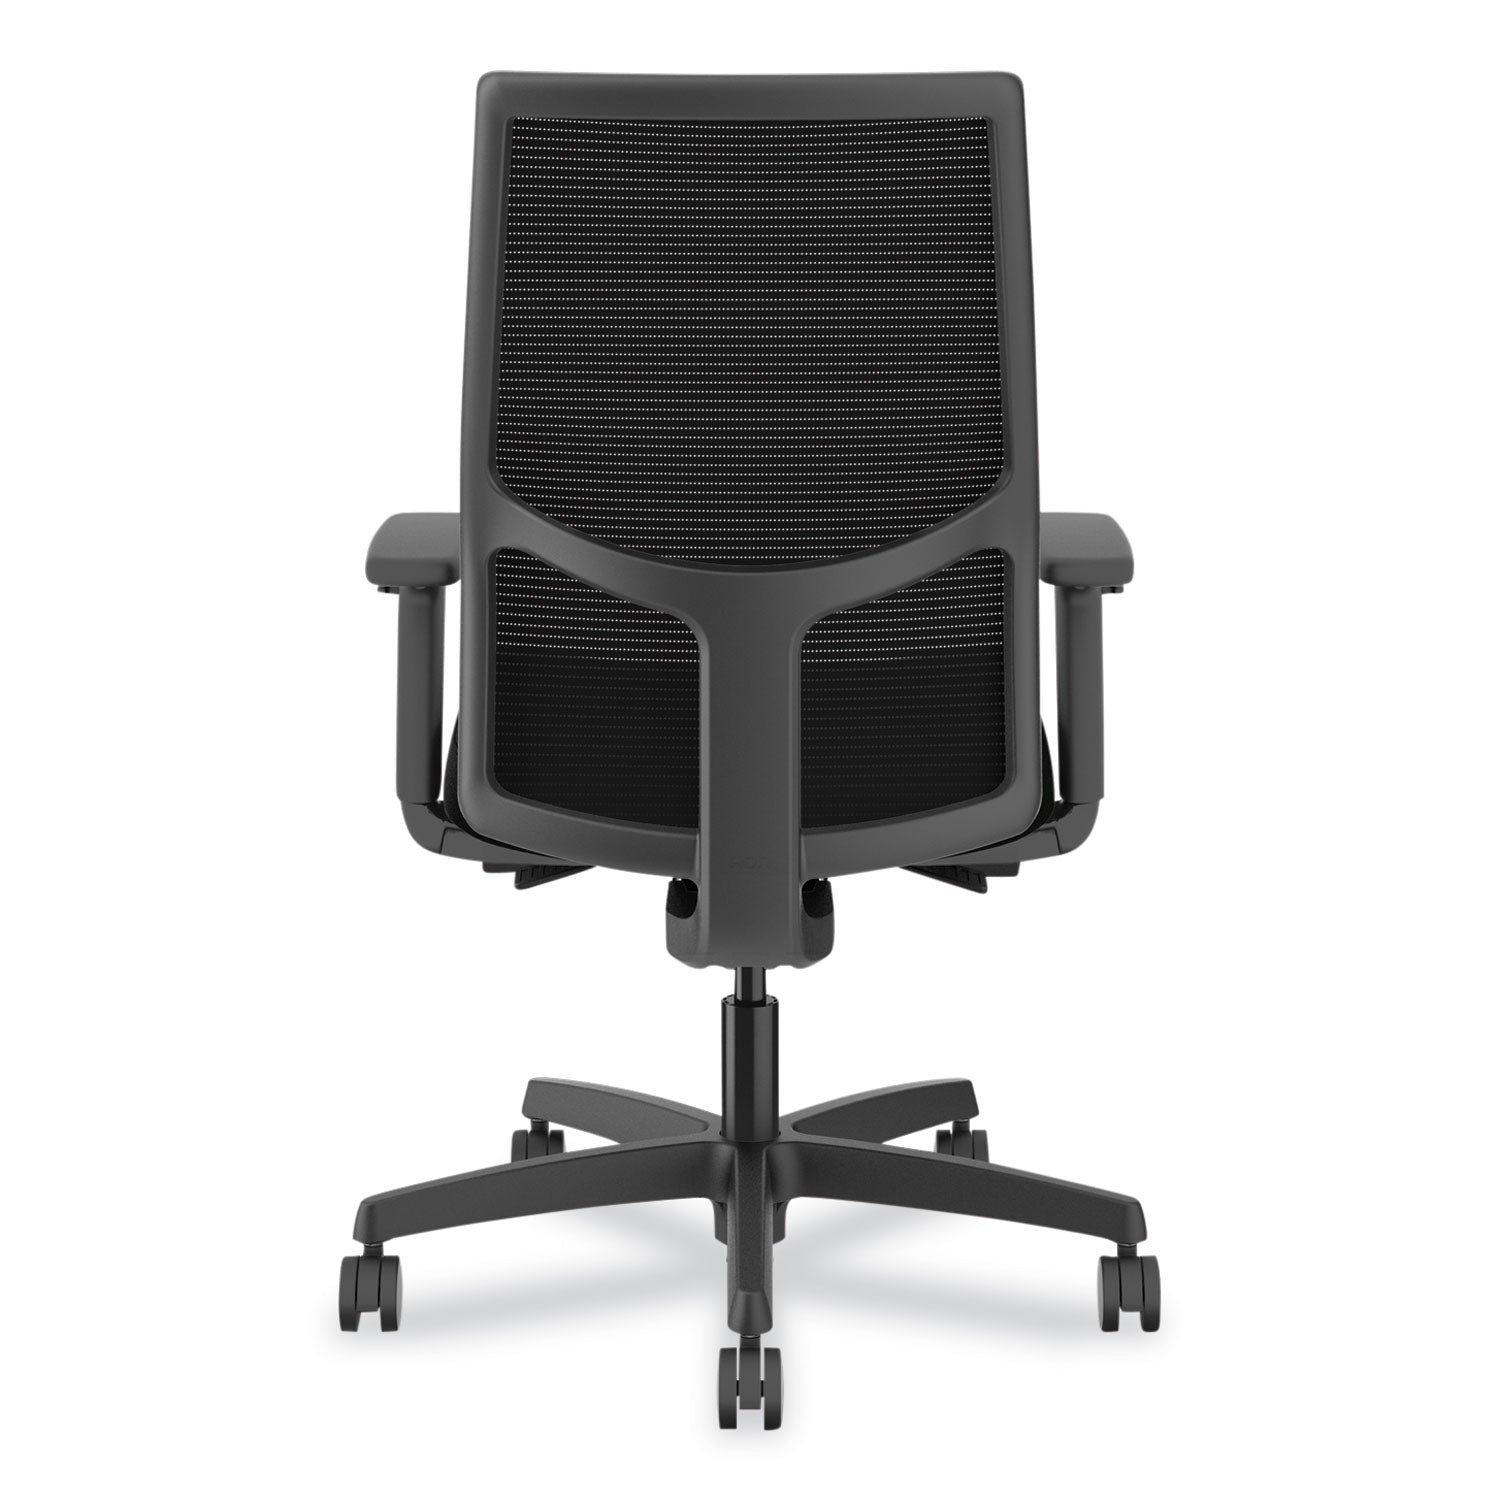 ignition-20-upholstered-mid-back-task-chair-17-to-215-seat-height-black-fabric-seat-back-ships-in-7-10-business-days_honi2u2ahur10tk - 4